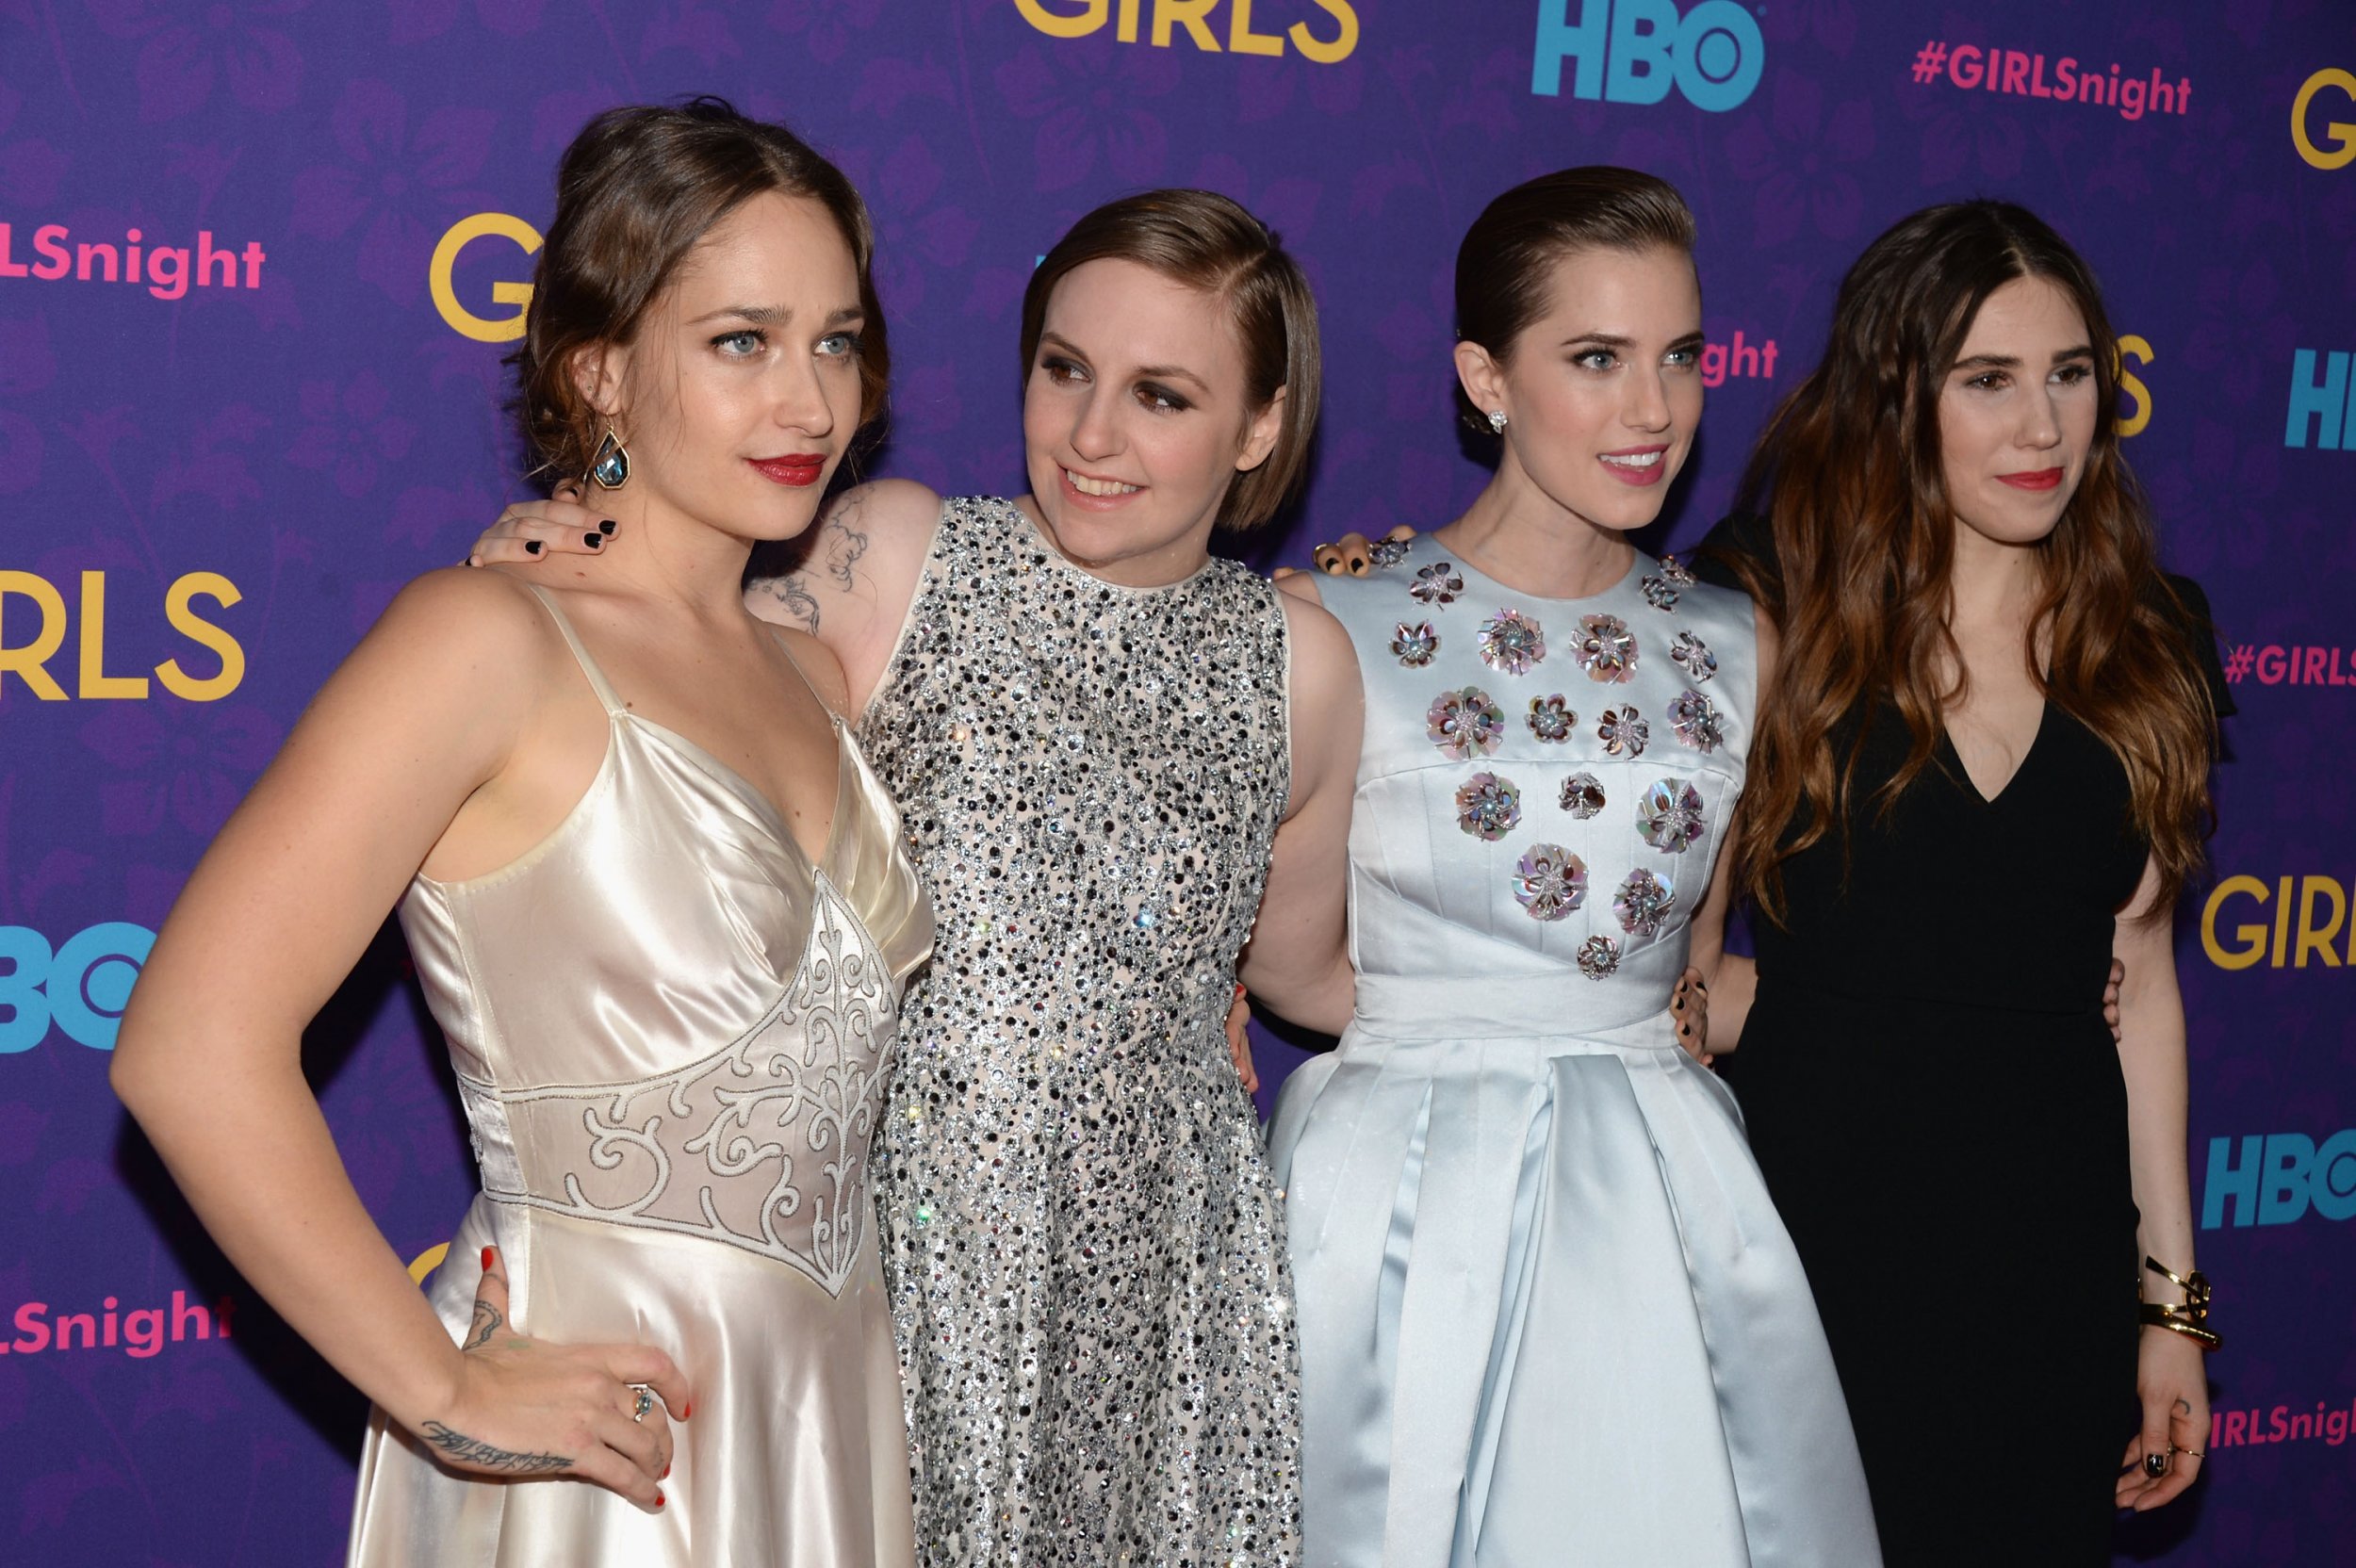 Lena Dunham and the cast of Girls